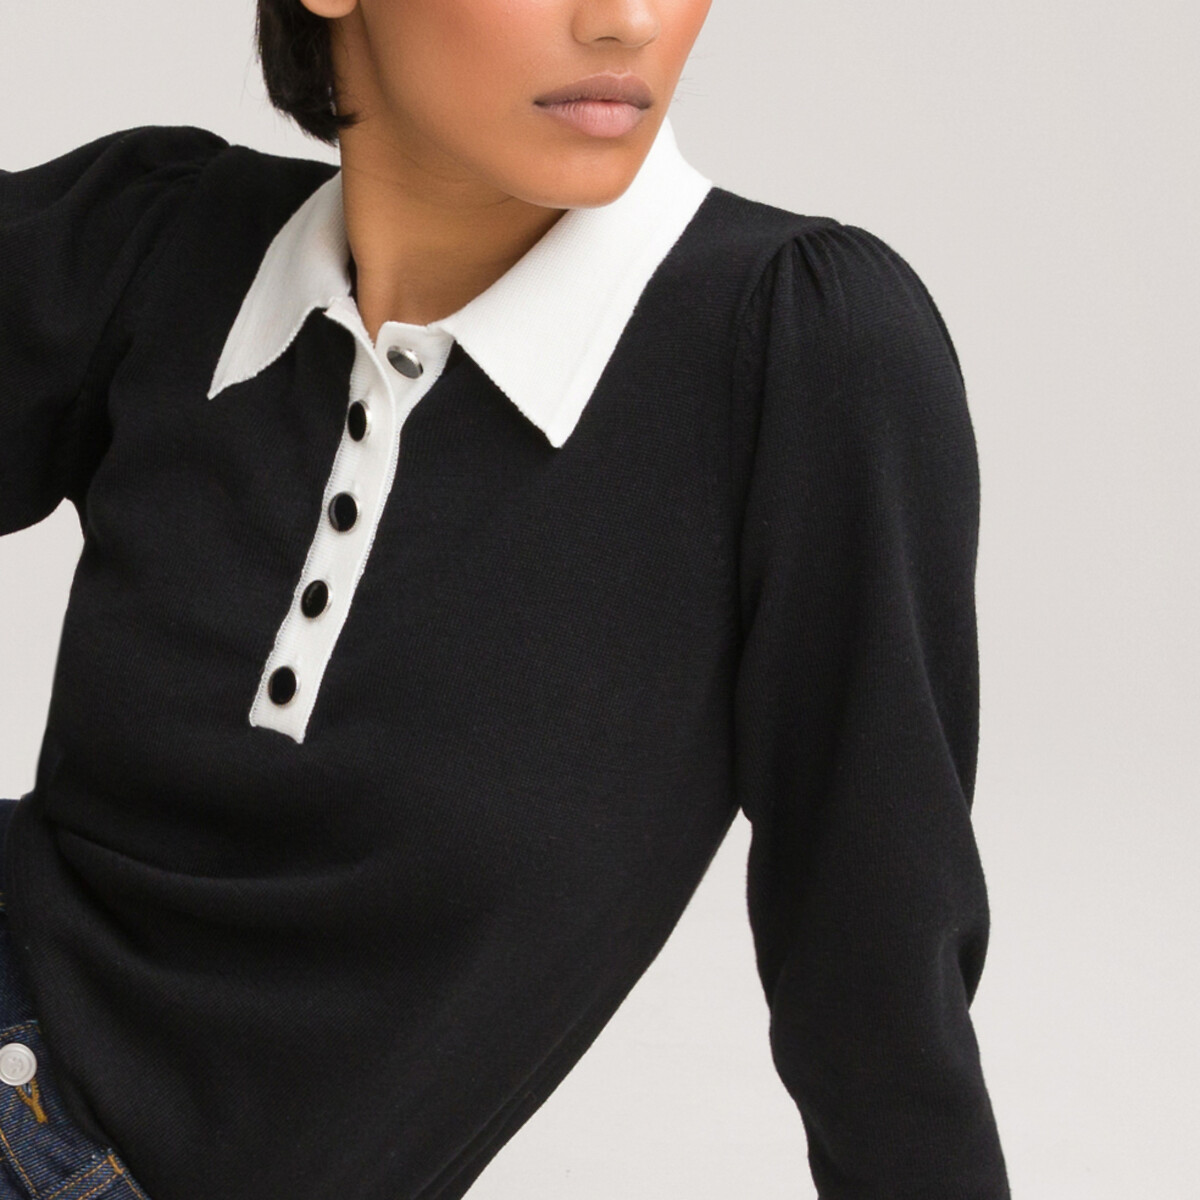 Two-tone polo jumper with jewelled buttons , black, La Redoute ...